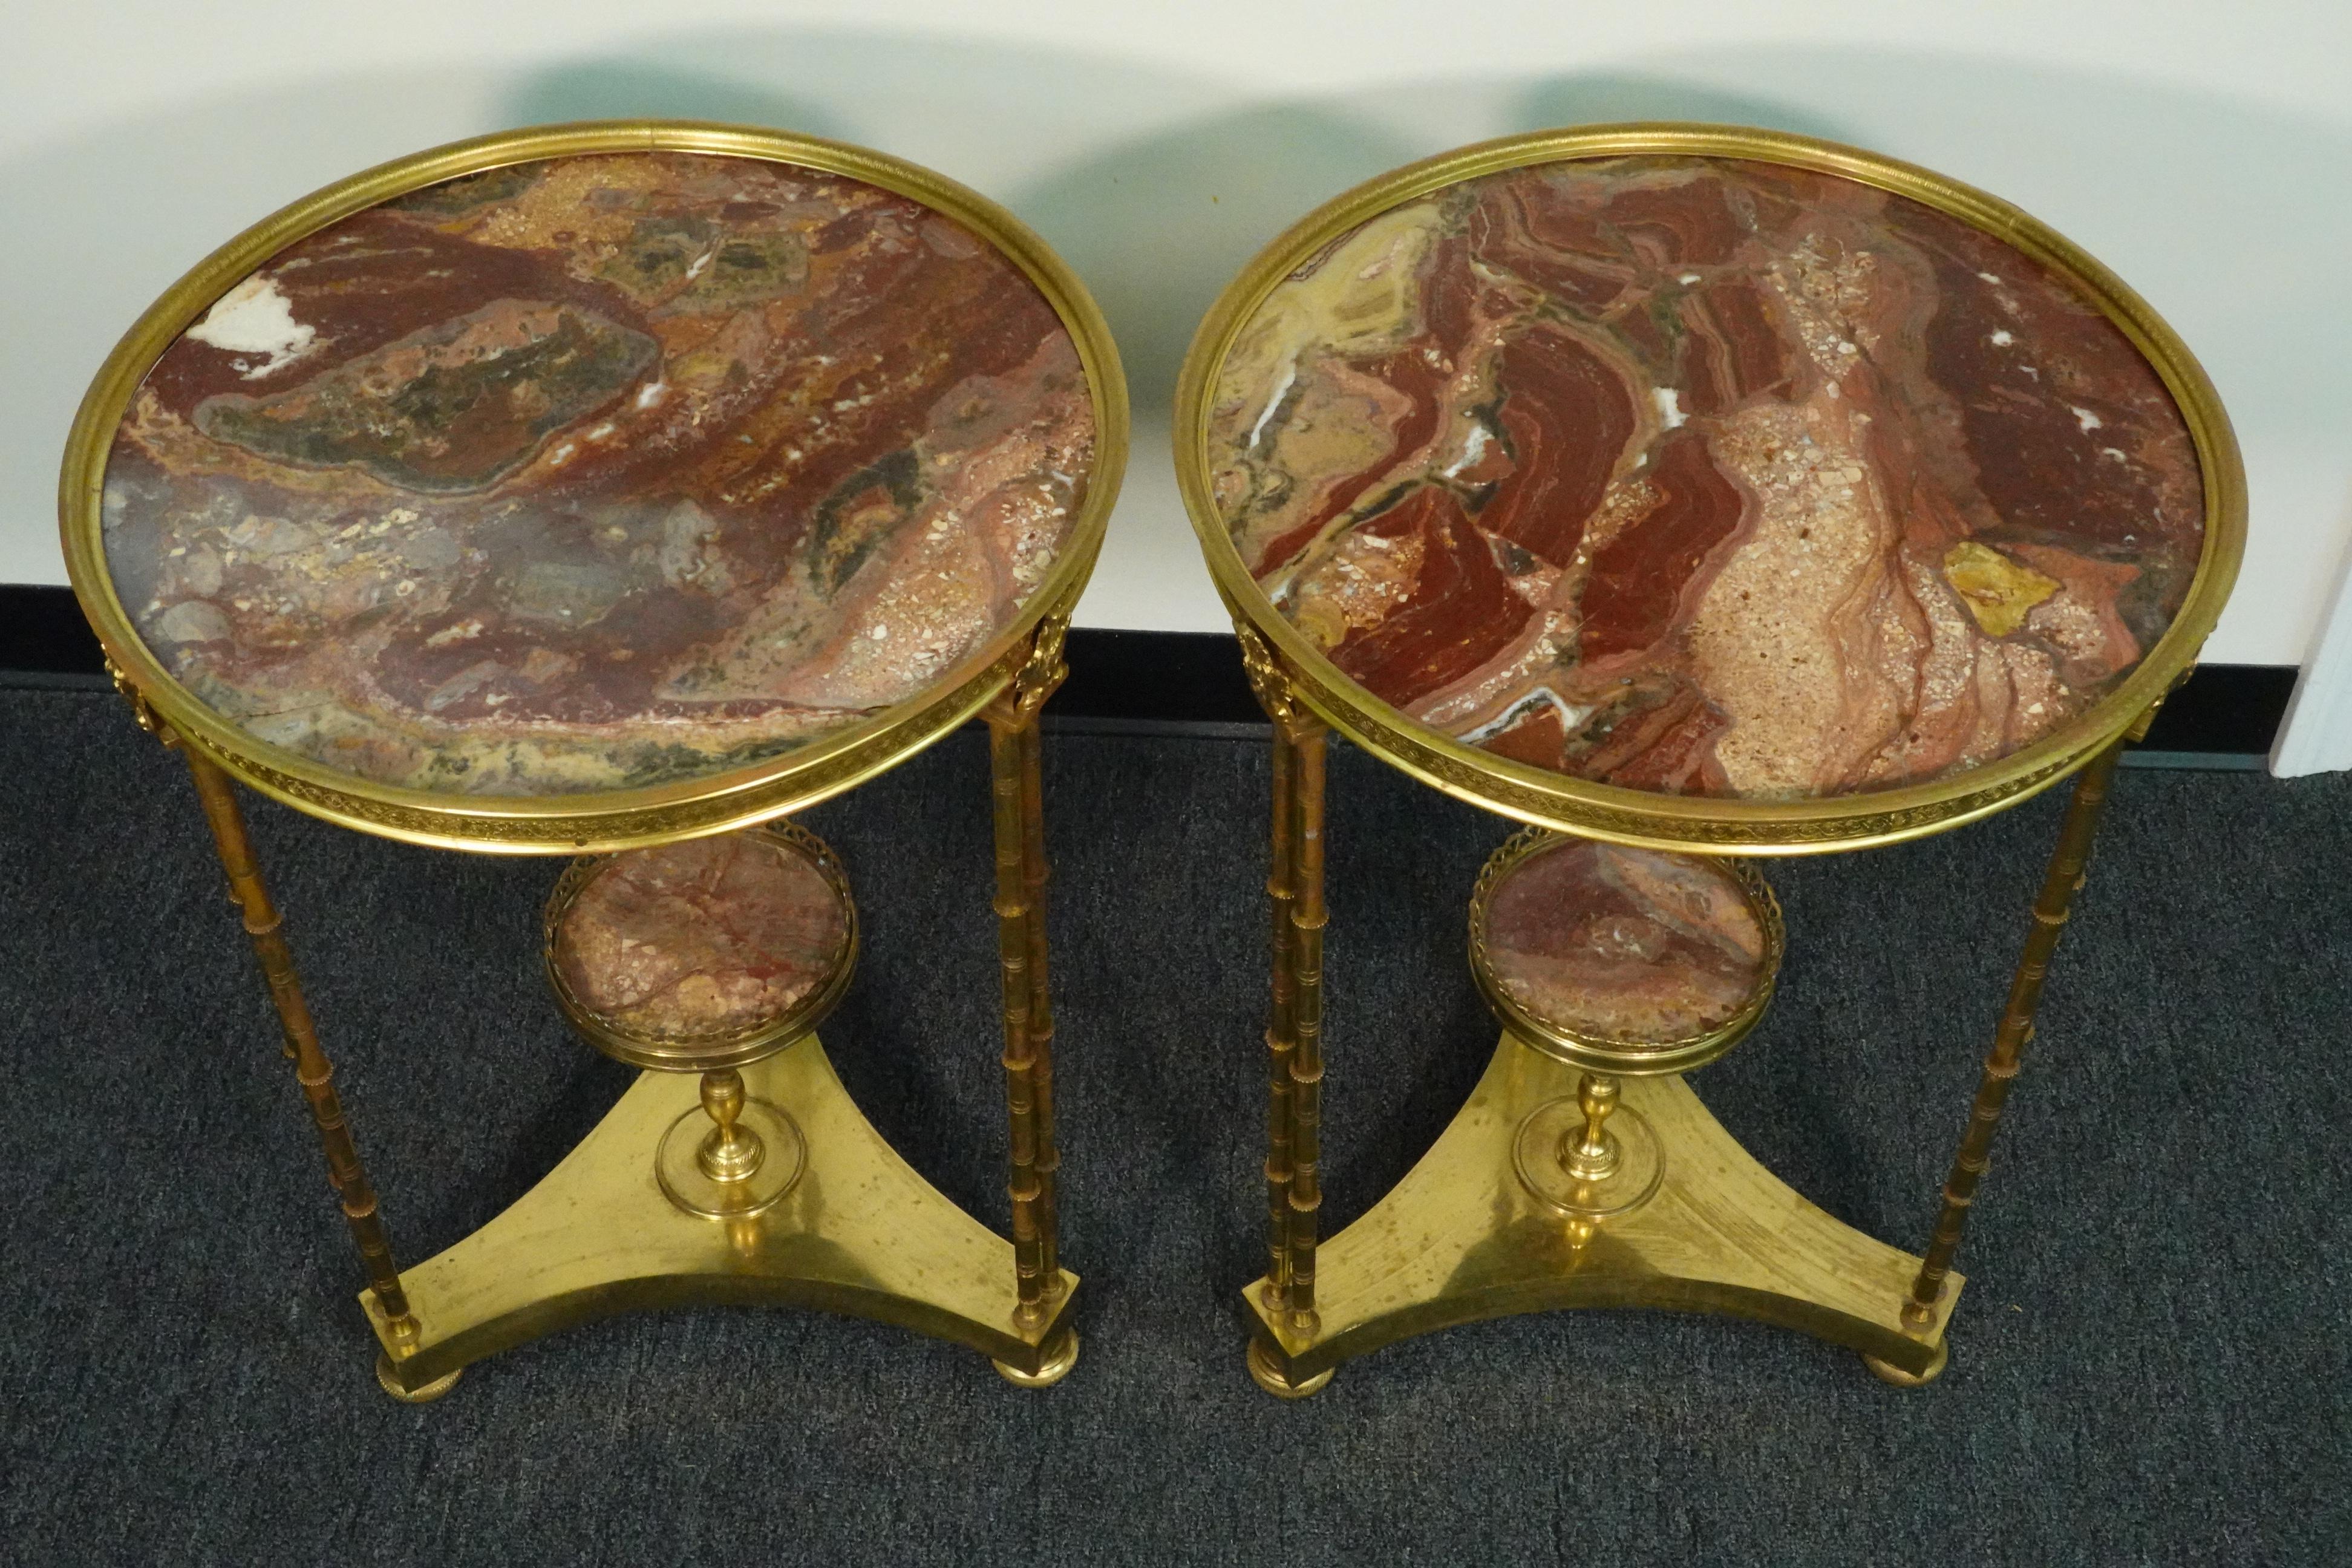 Pair of Louis XVI Style Gilt-Bronze Gueridons with Breche d'Alep Marble Tops In Good Condition For Sale In Pembroke, MA